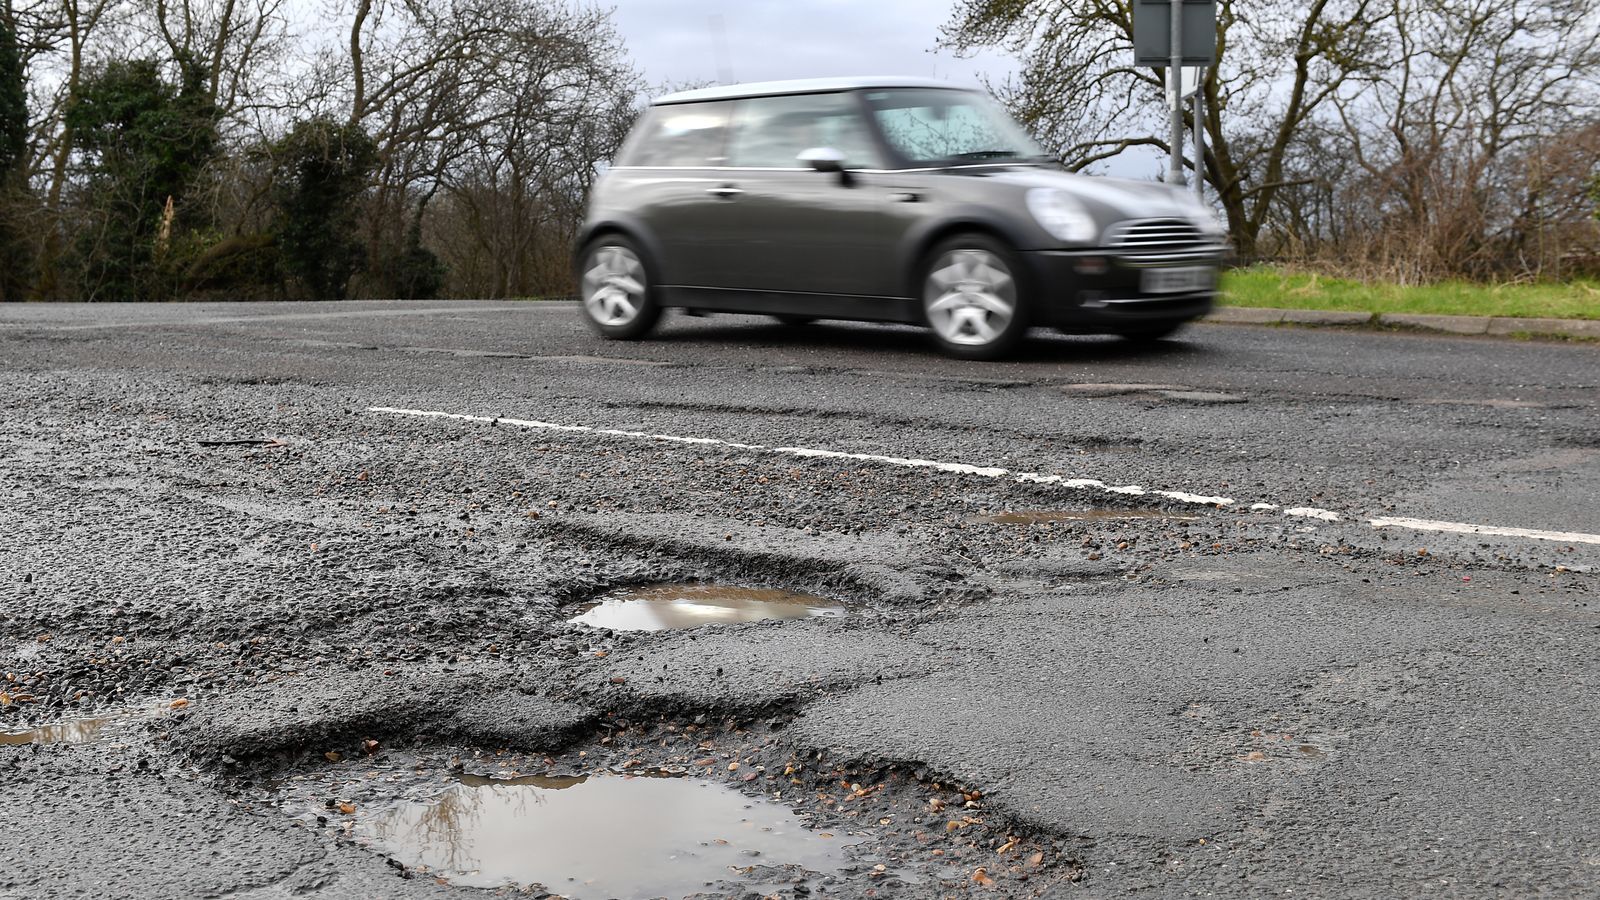 UK spends least out of 13 nations on repairing roads 'blighted' by potholes 